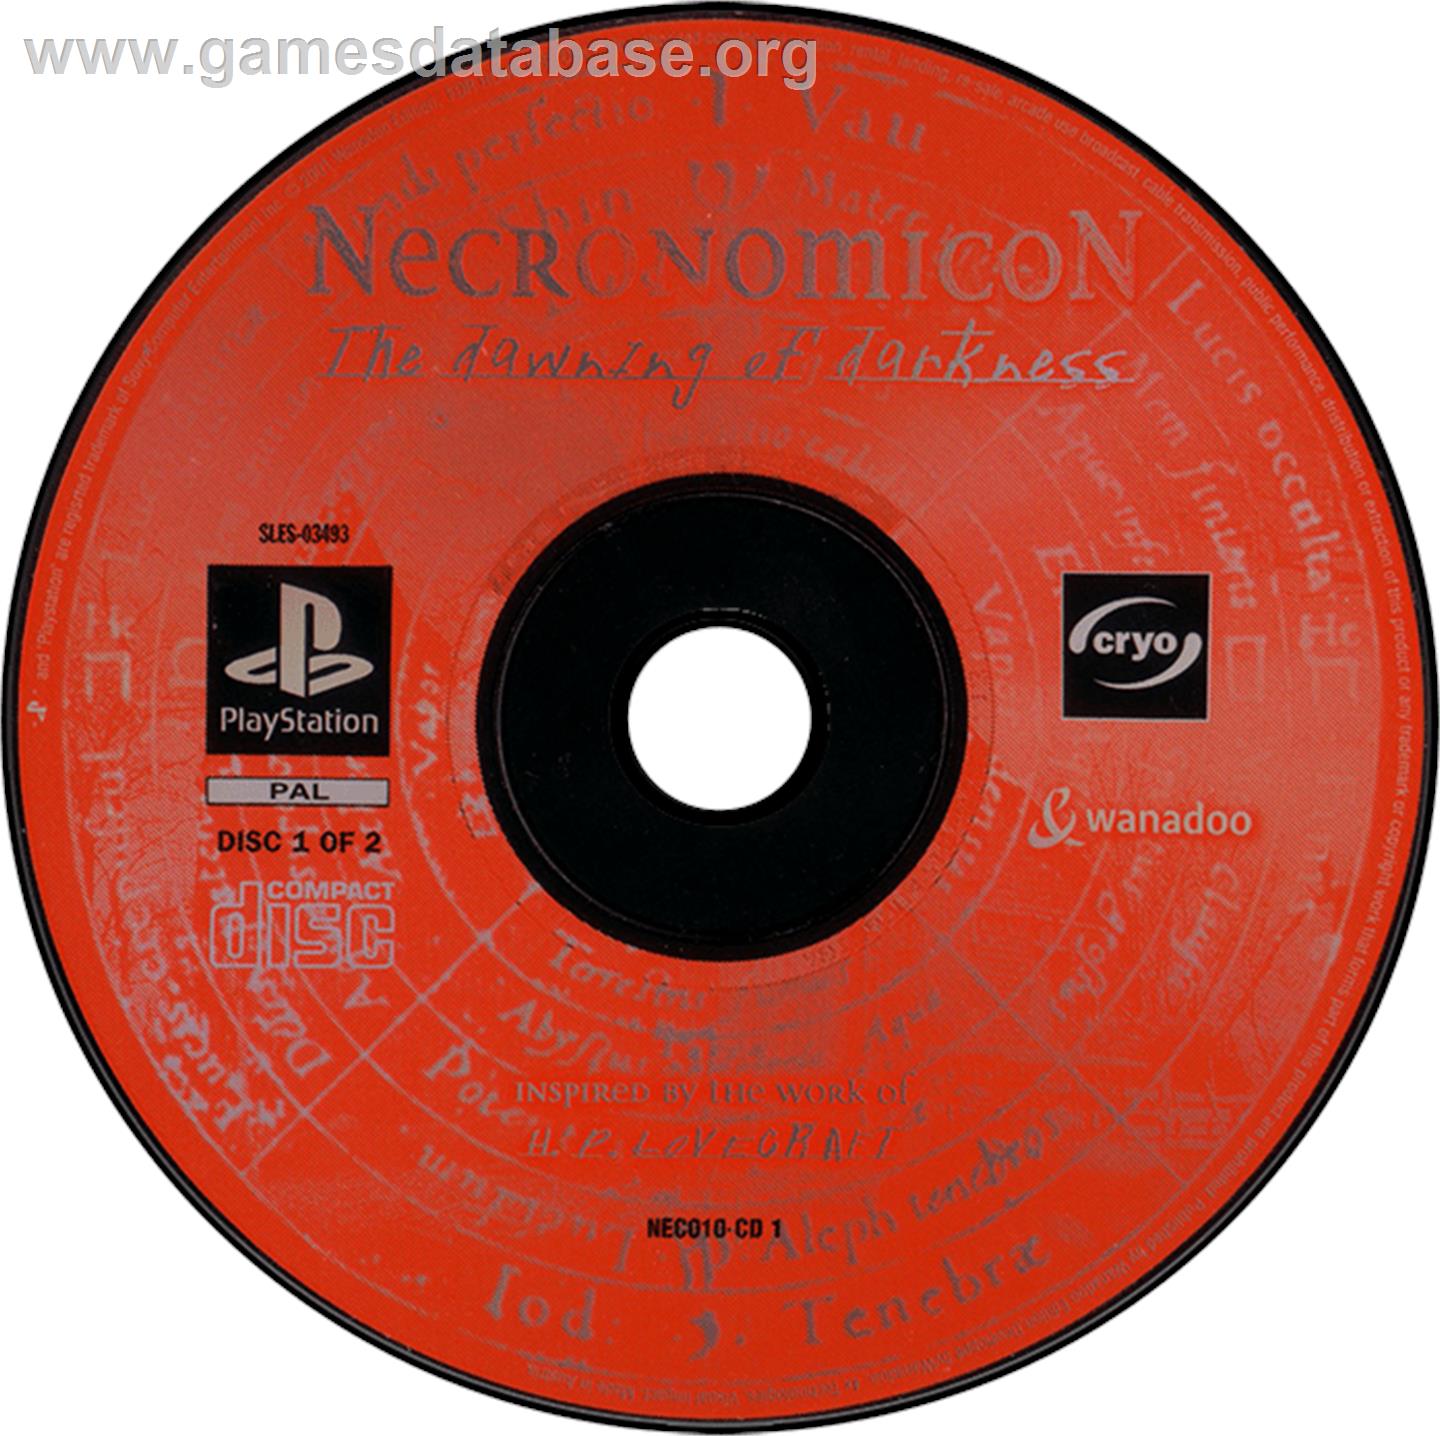 Necronomicon: The Dawning of Darkness - Sony Playstation - Artwork - Disc